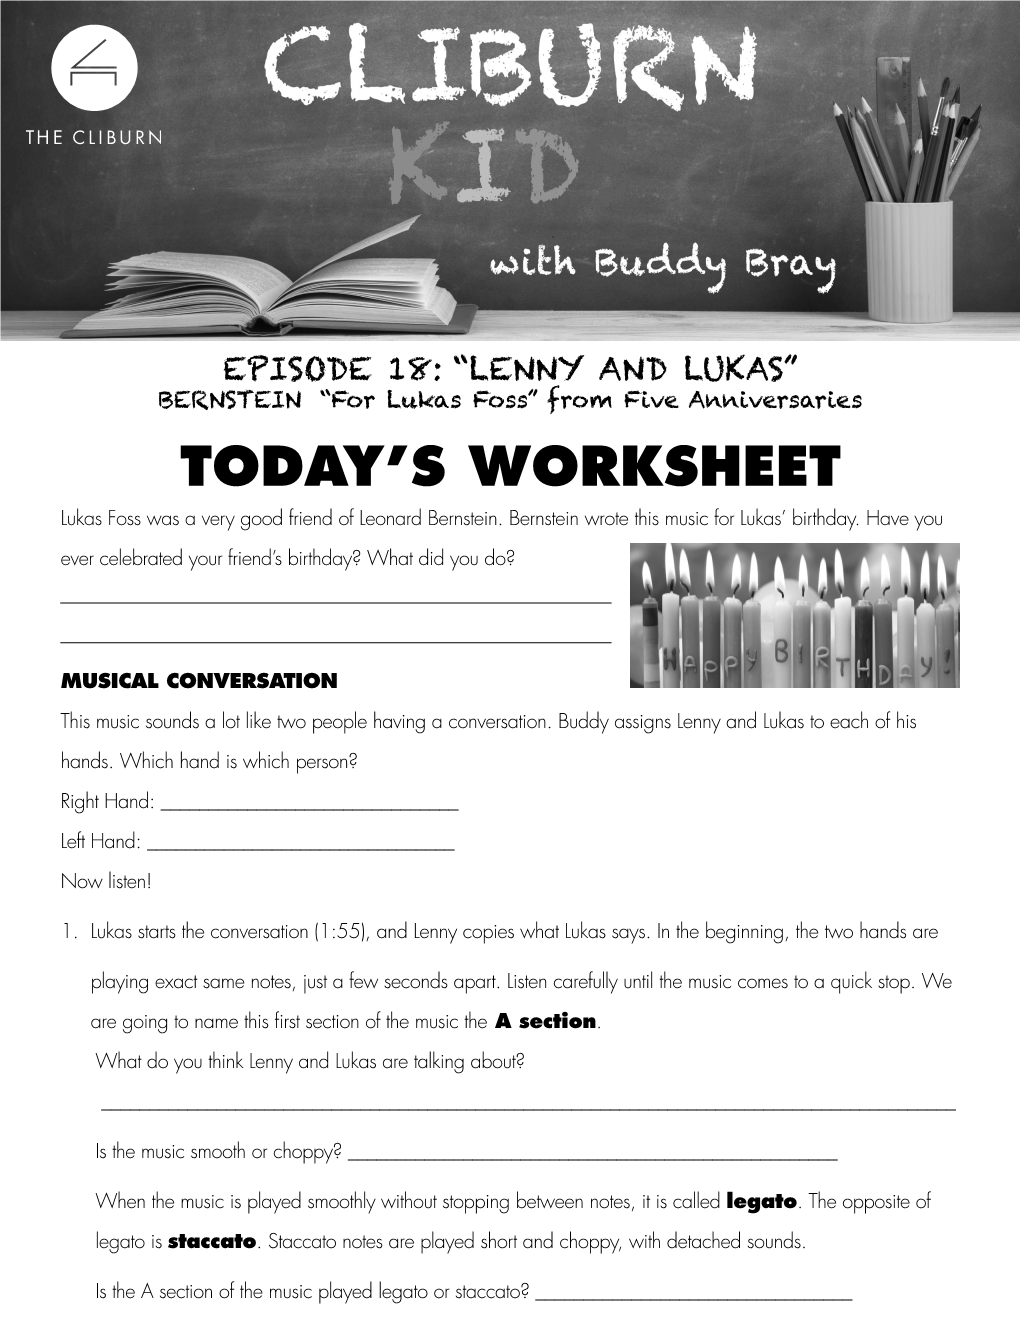 Today's Worksheet